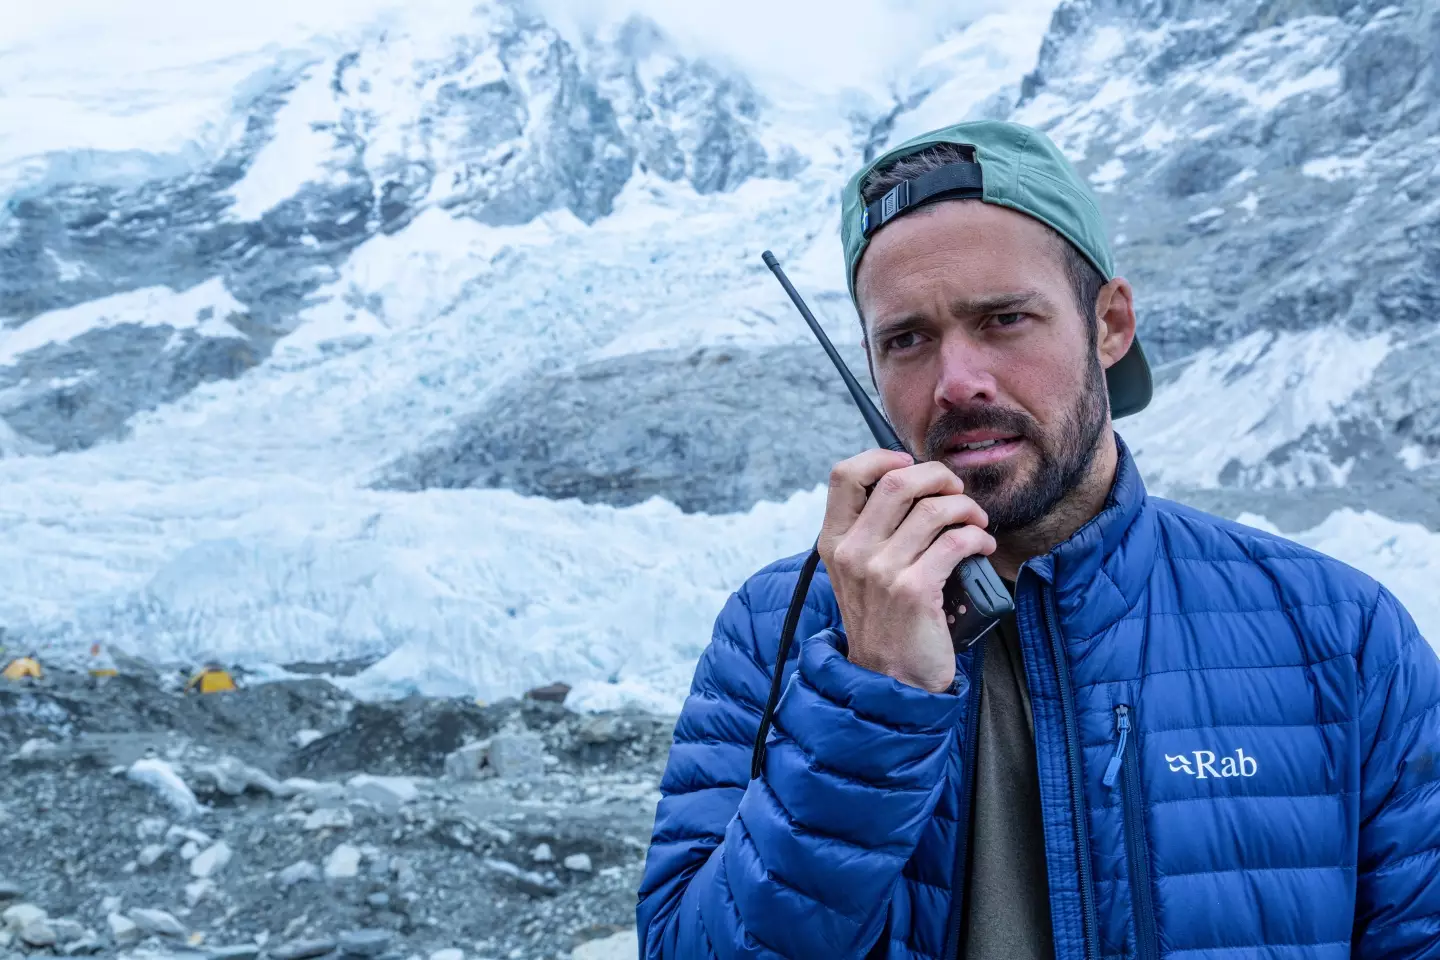 Following a tip-off, Spencer put together a top team to go to Everest and bring his brother home.